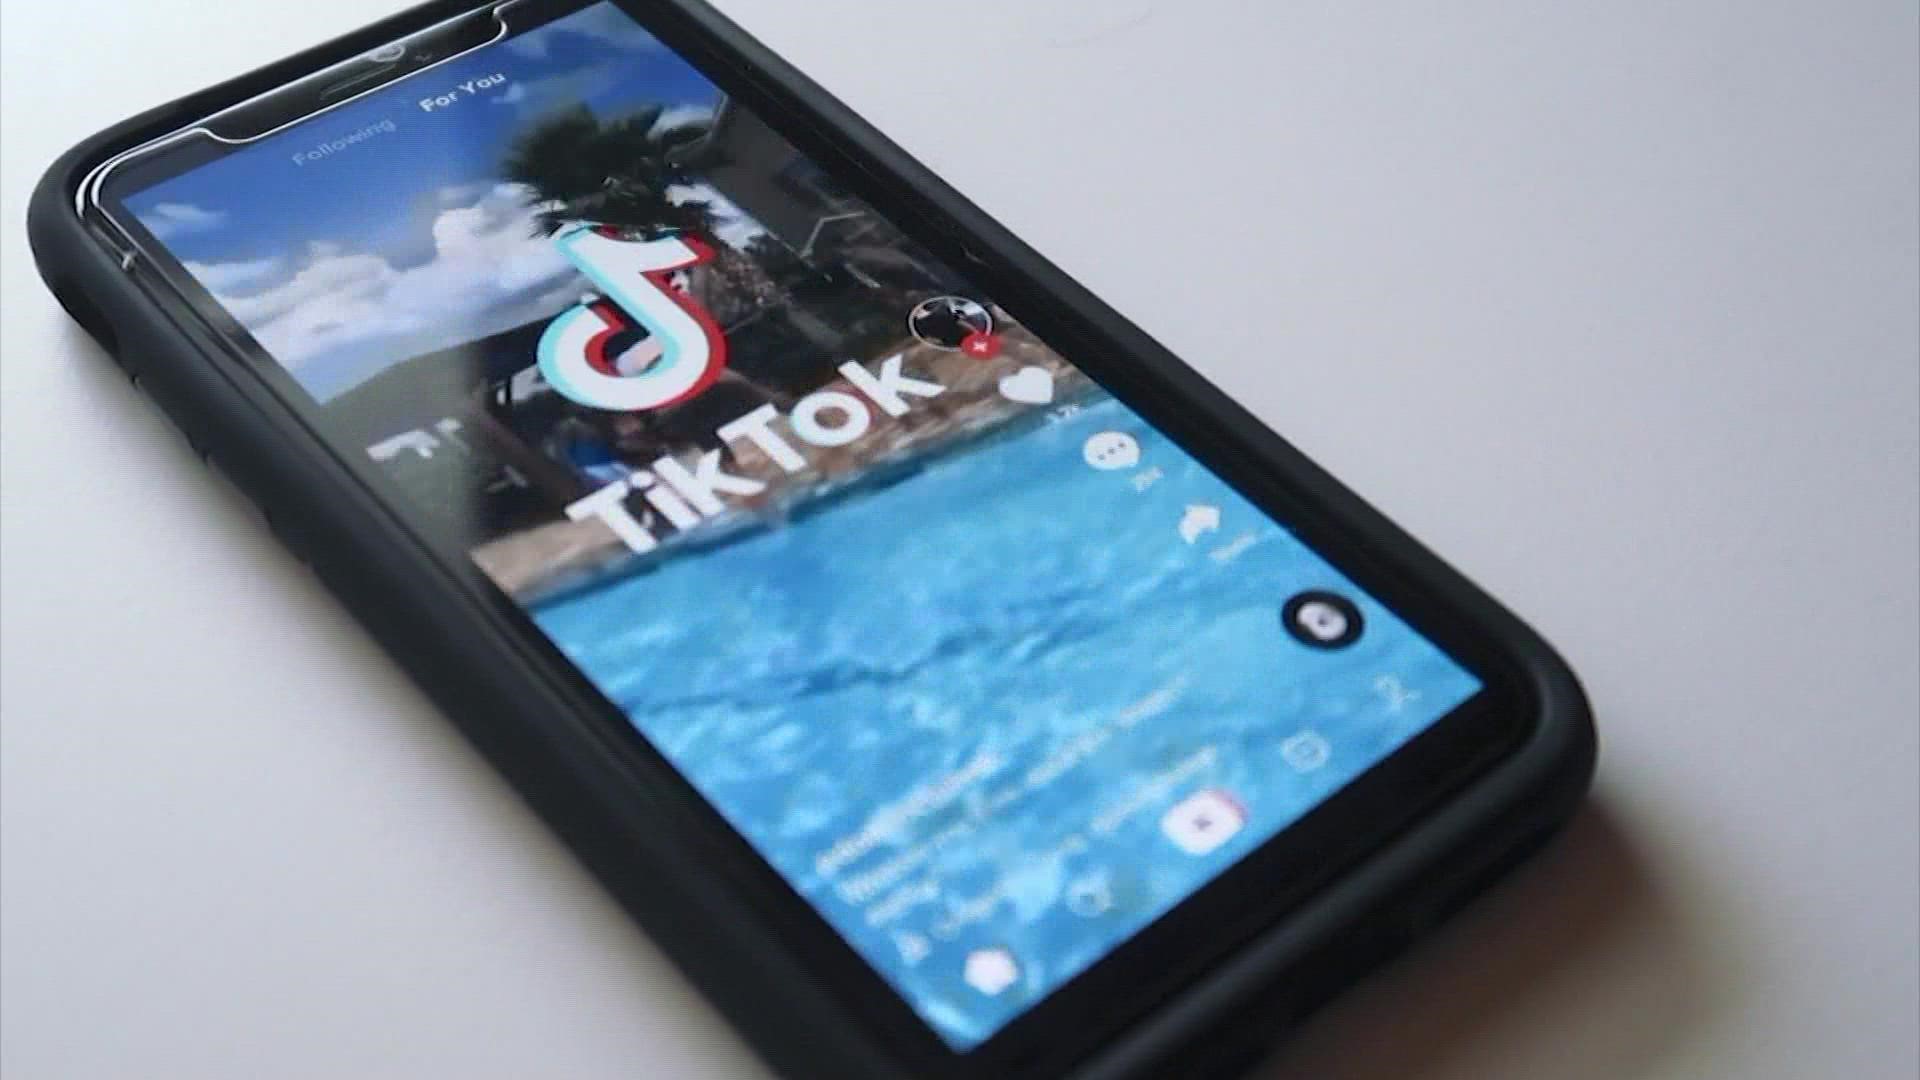 State agency leaders are ordered to immediately ban their officers and employees from downloading or using TikTok on any government-issued device.